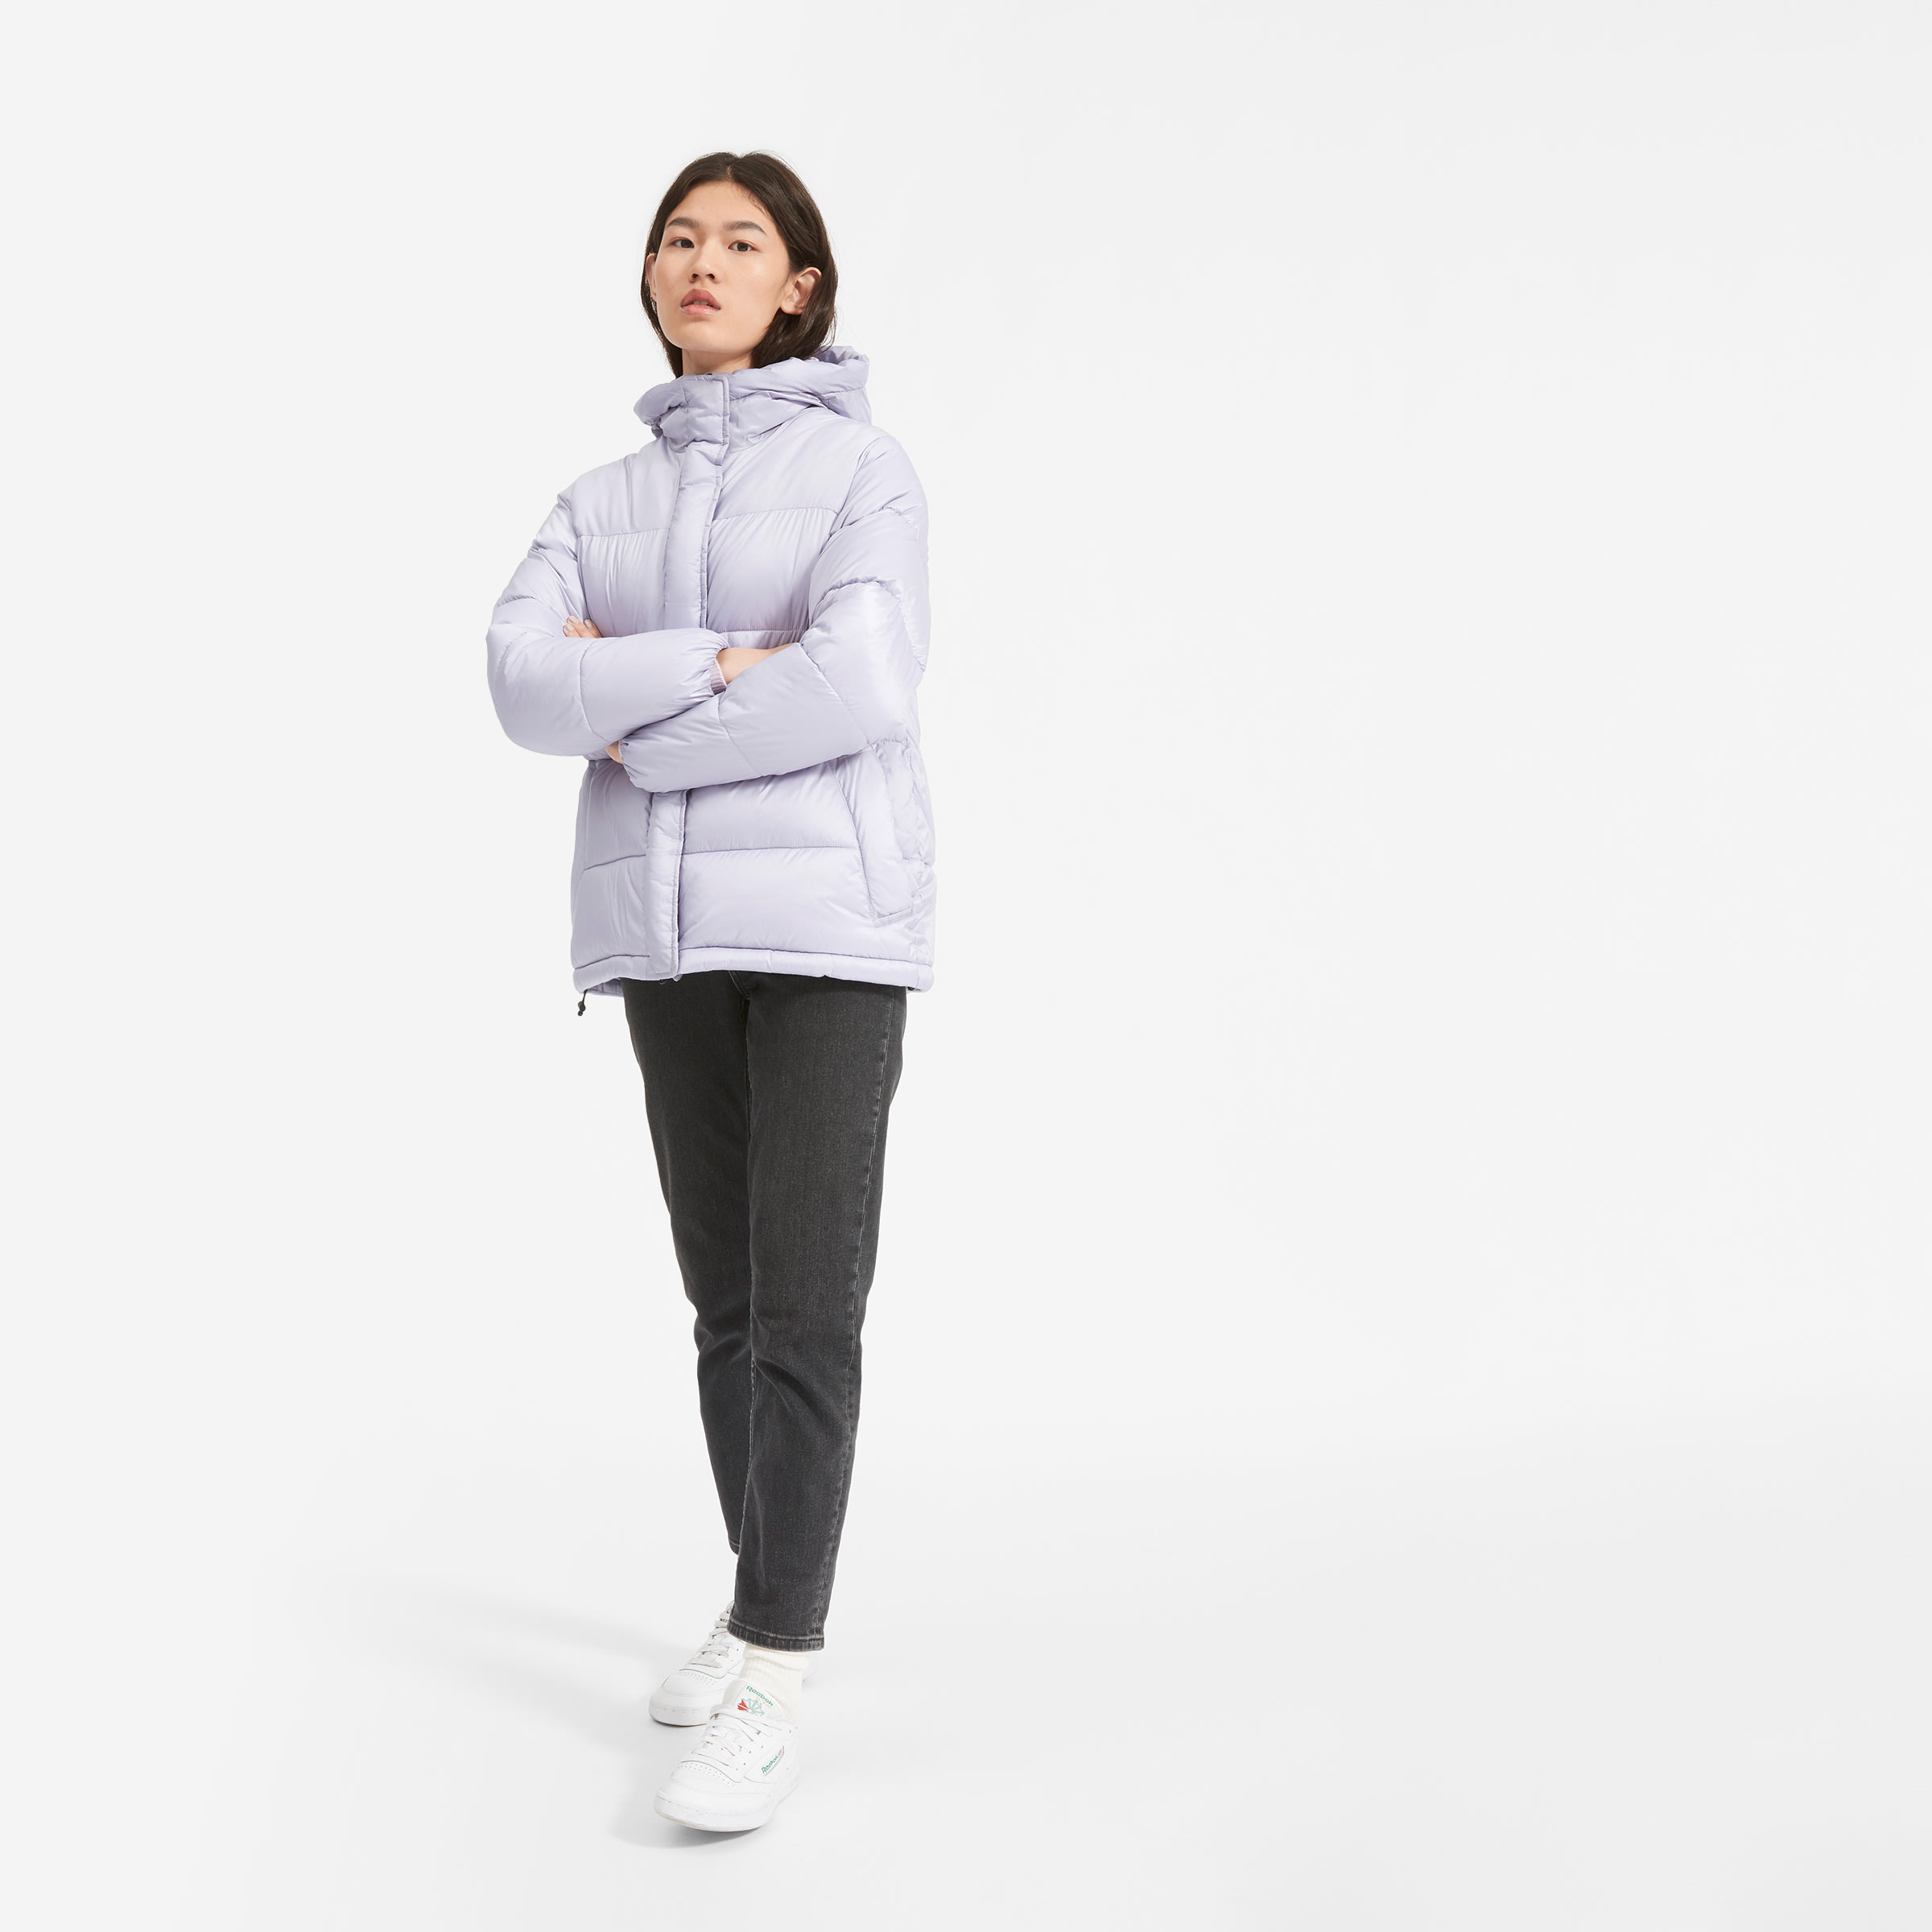 Everlane's ReNew Puffy Puff With a 38,000 Person Waitlist Is Back in Stock